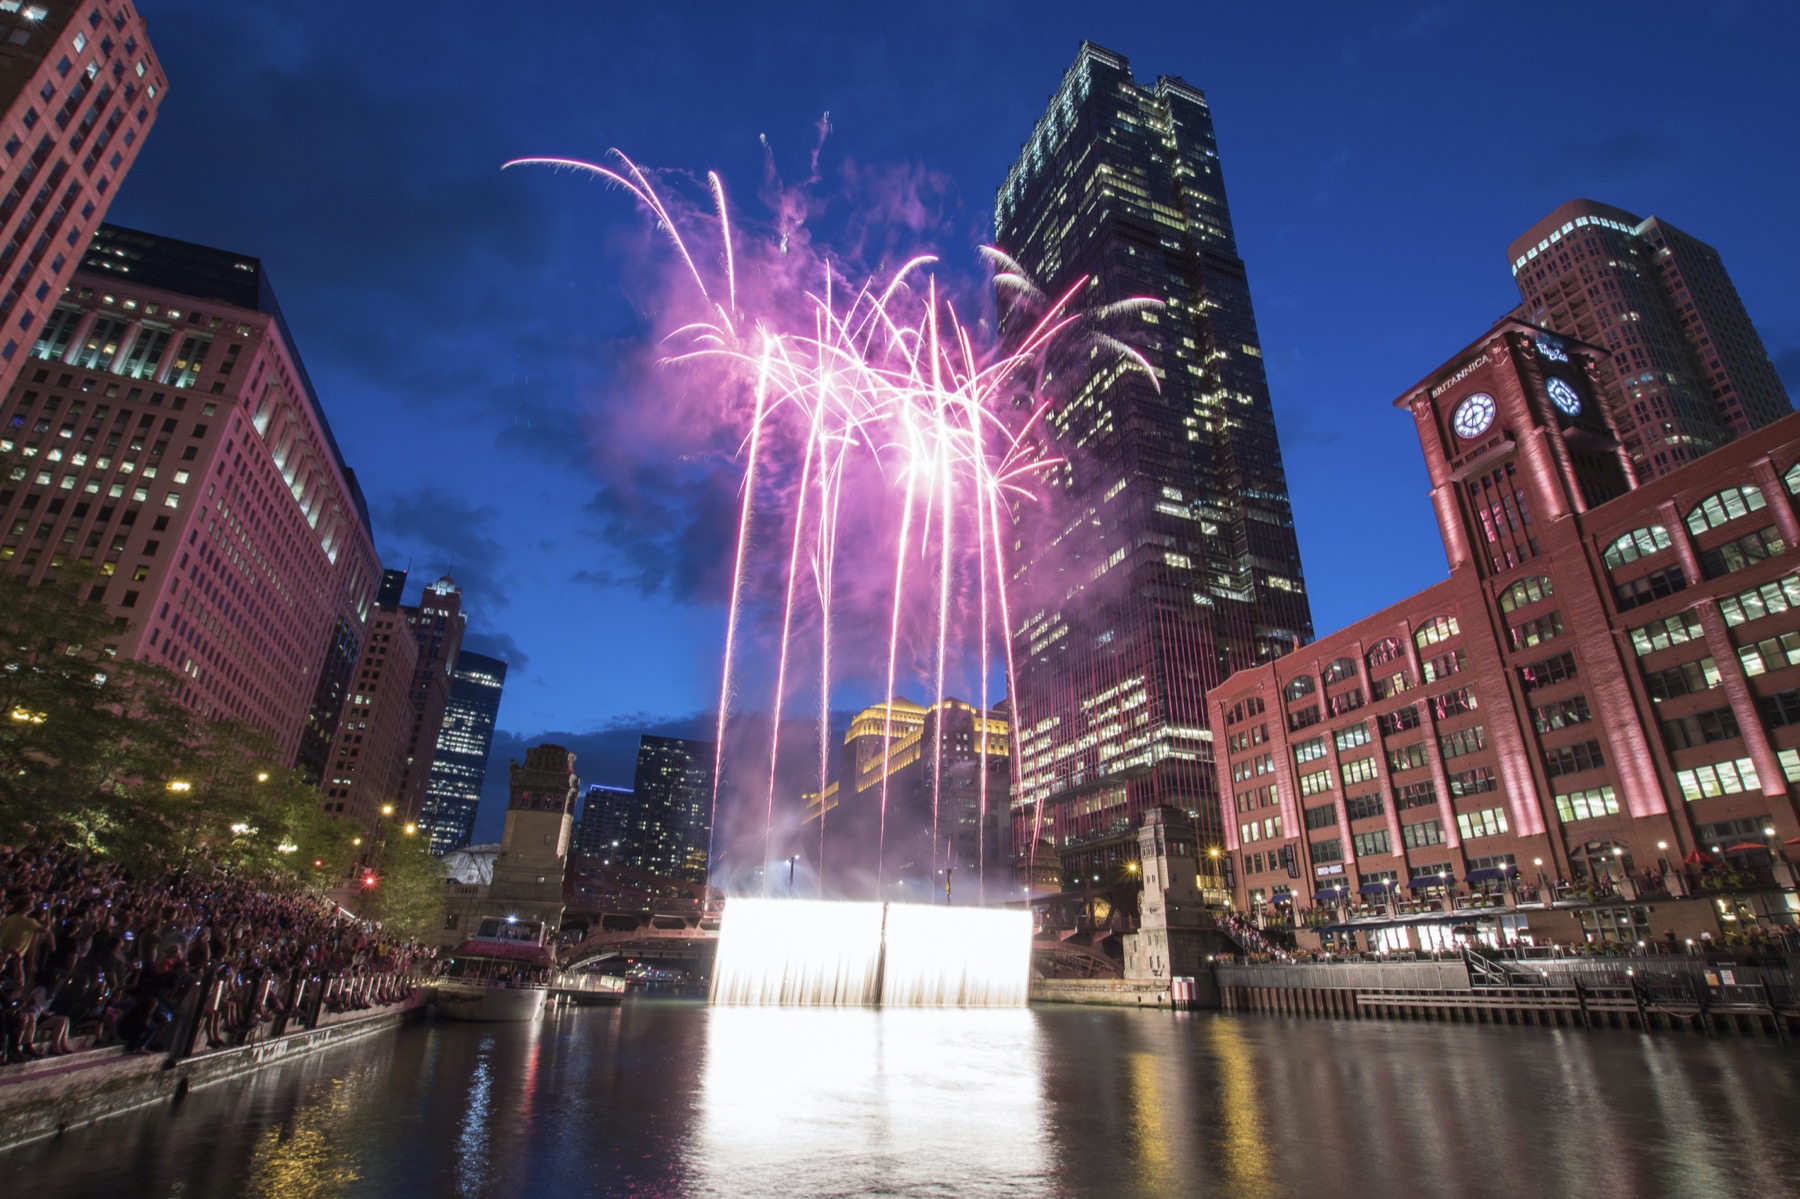 50+ things to do in Chicago this December Lights, Shows & Events